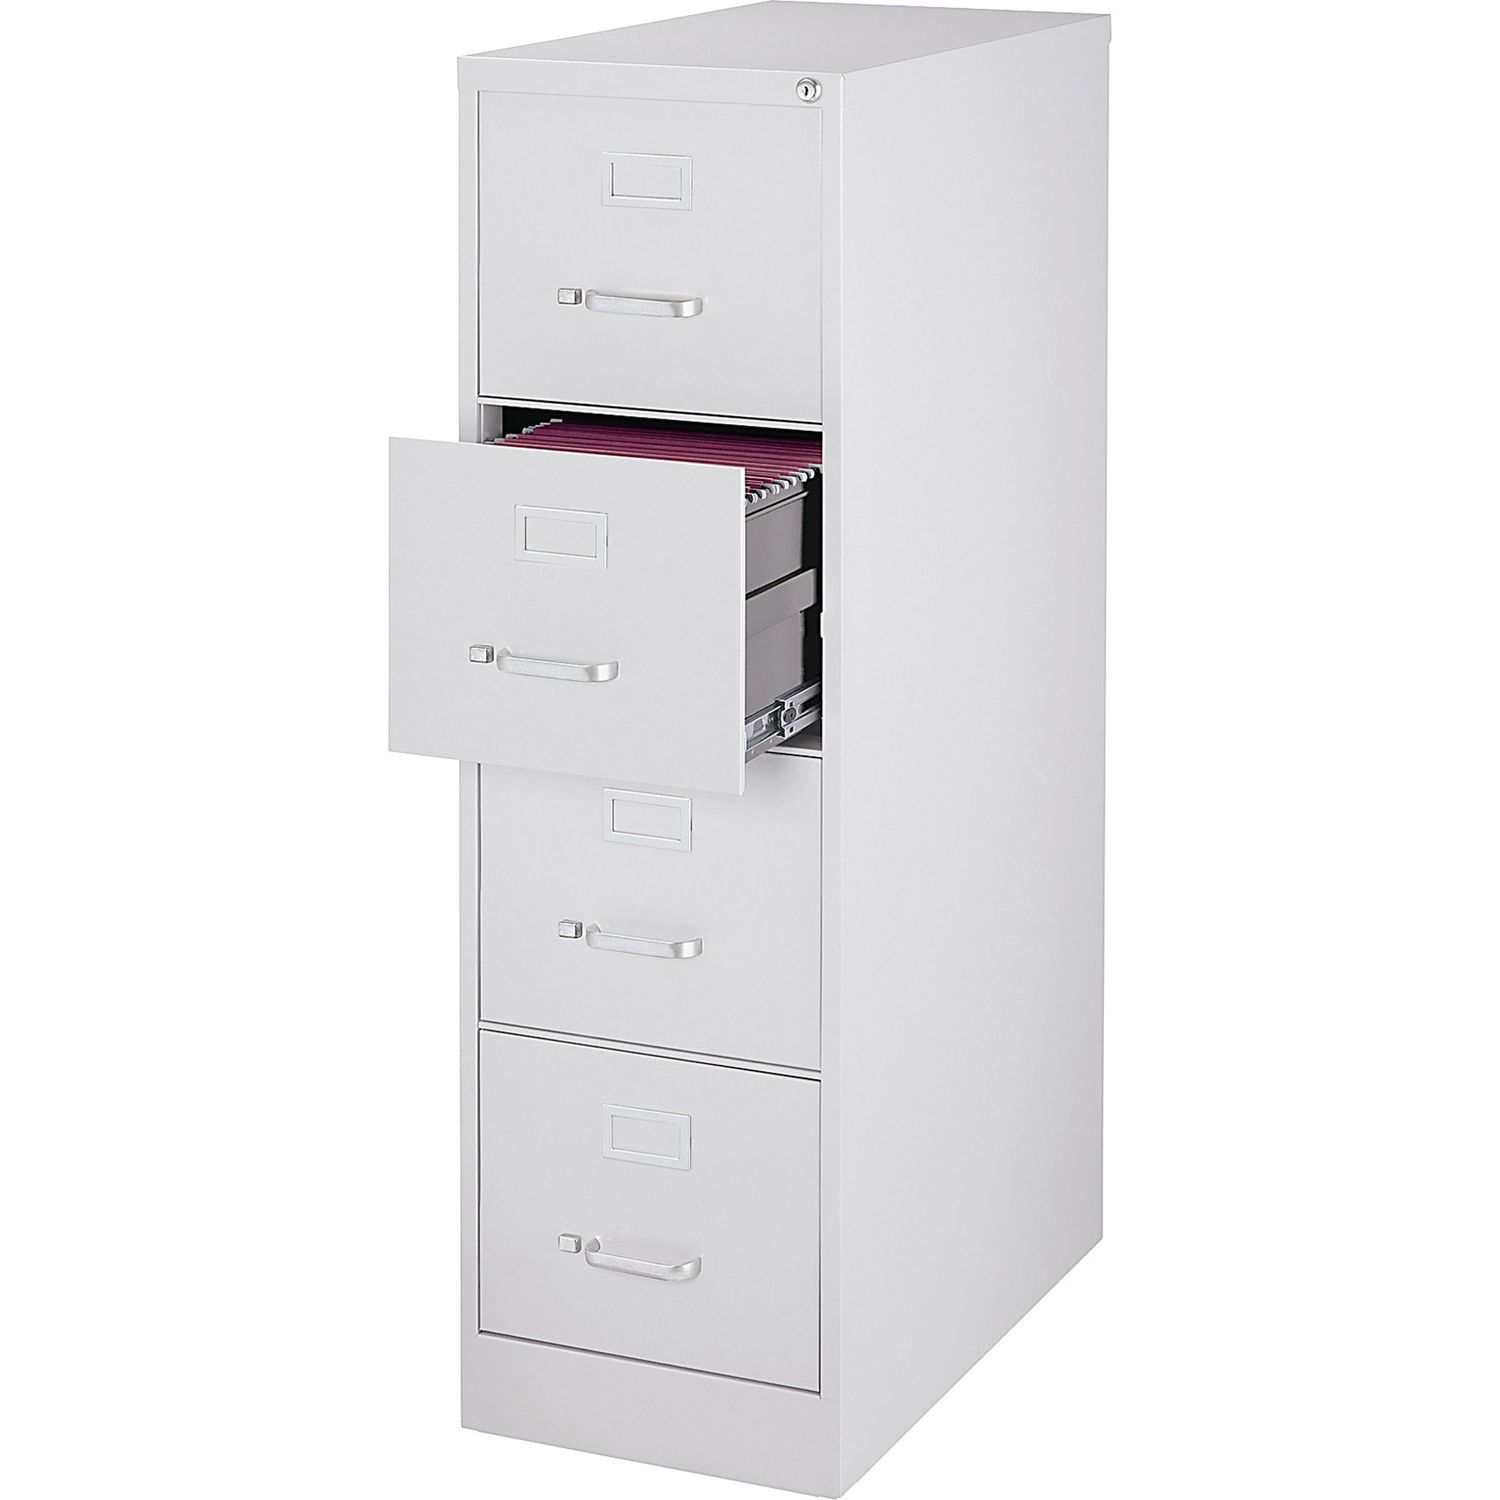 Fortress Series 28.5'' Letter-size Vertical Files - 4-Drawer 15" x 28.5" x 52", 4 x Drawer(s) for File, Letter, Vertical, Ball Bearing Glide, Label Holder, Locking Drawer, Heavy Duty, Light Gray